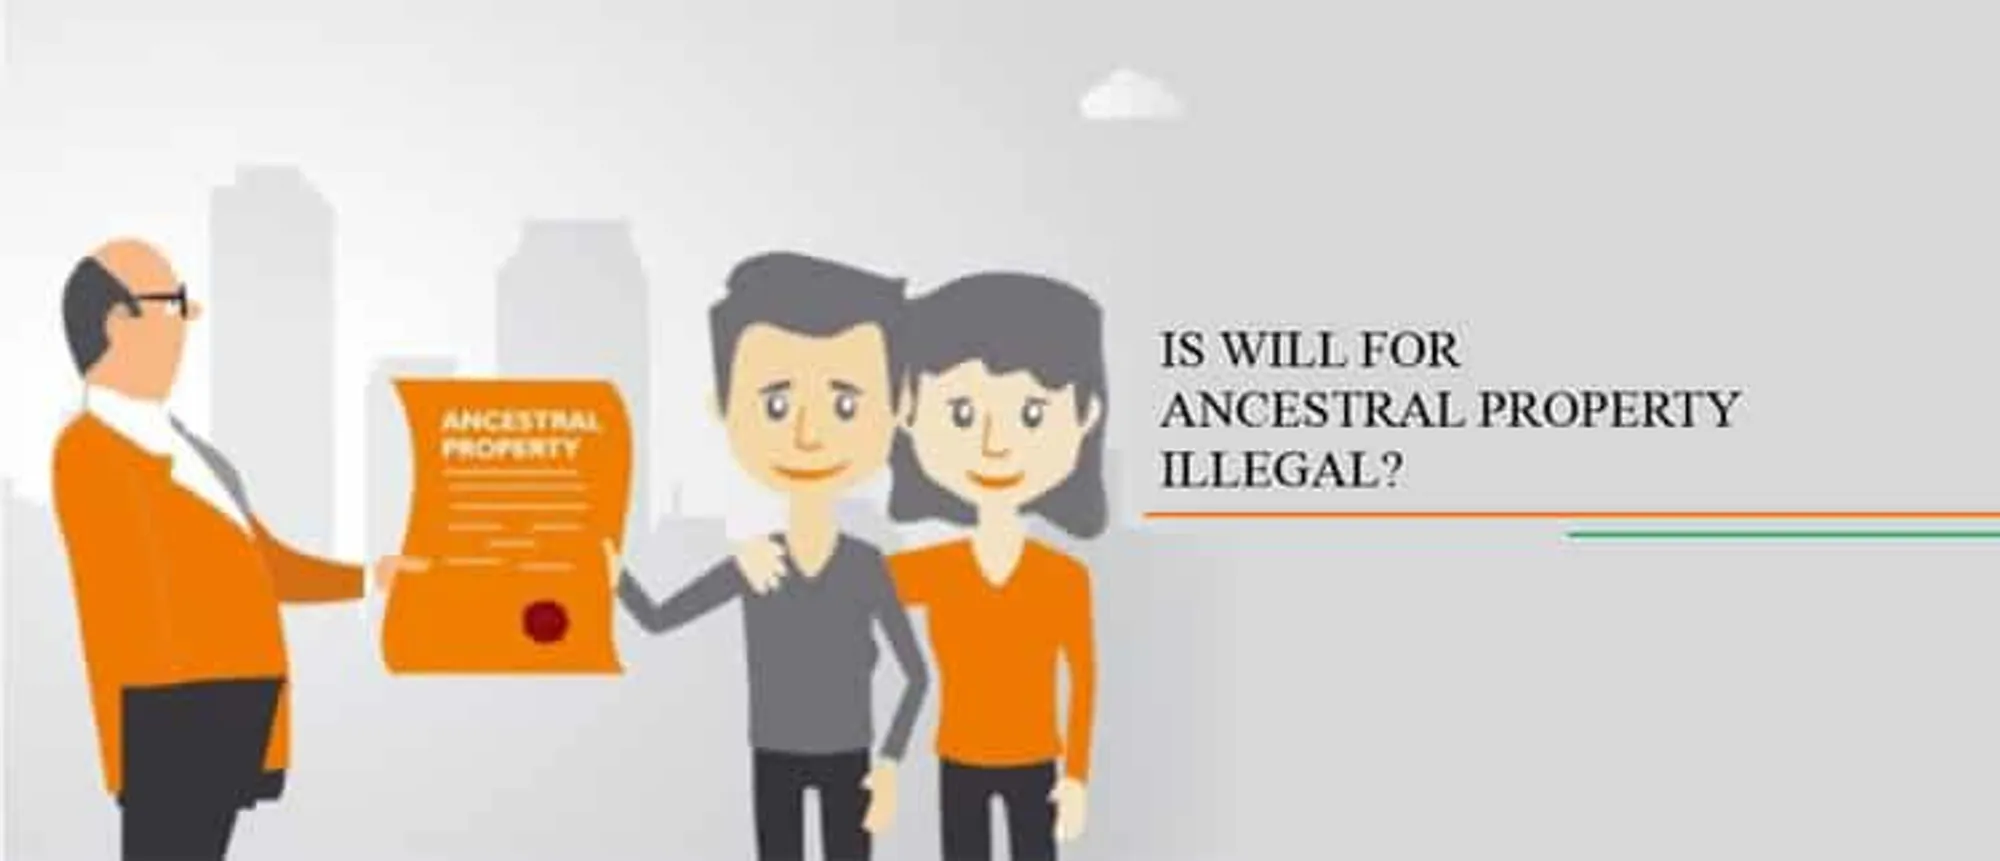 IS WILL FOR ANCESTRAL PROPERTY ILLEGAL